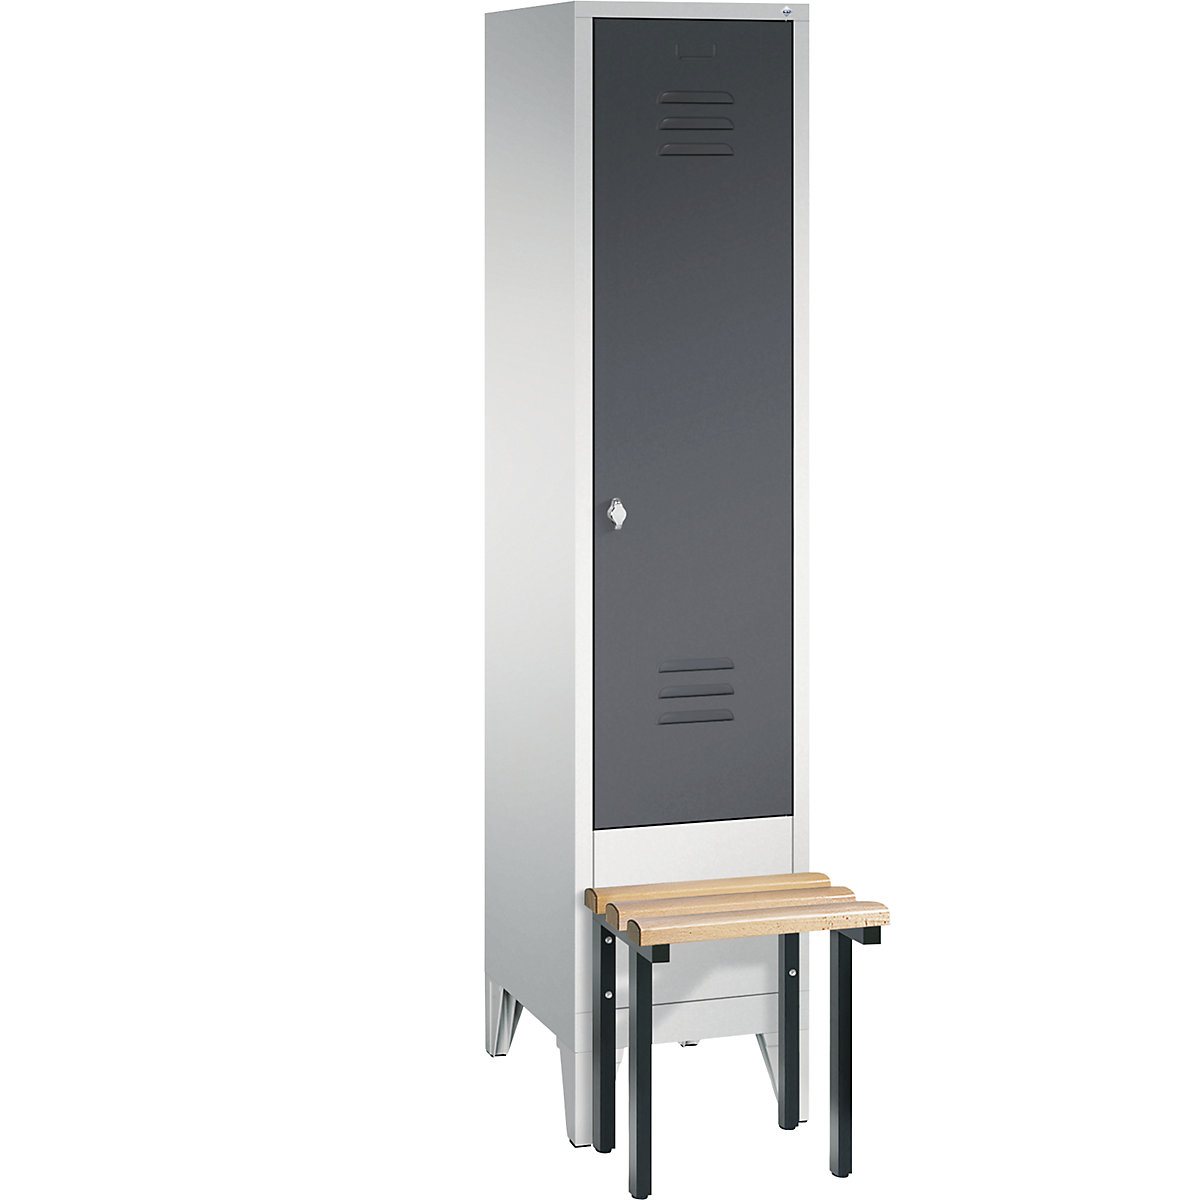 CLASSIC cloakroom locker with bench mounted in front – C+P, 1 compartment, compartment width 400 mm, light grey / black grey-11